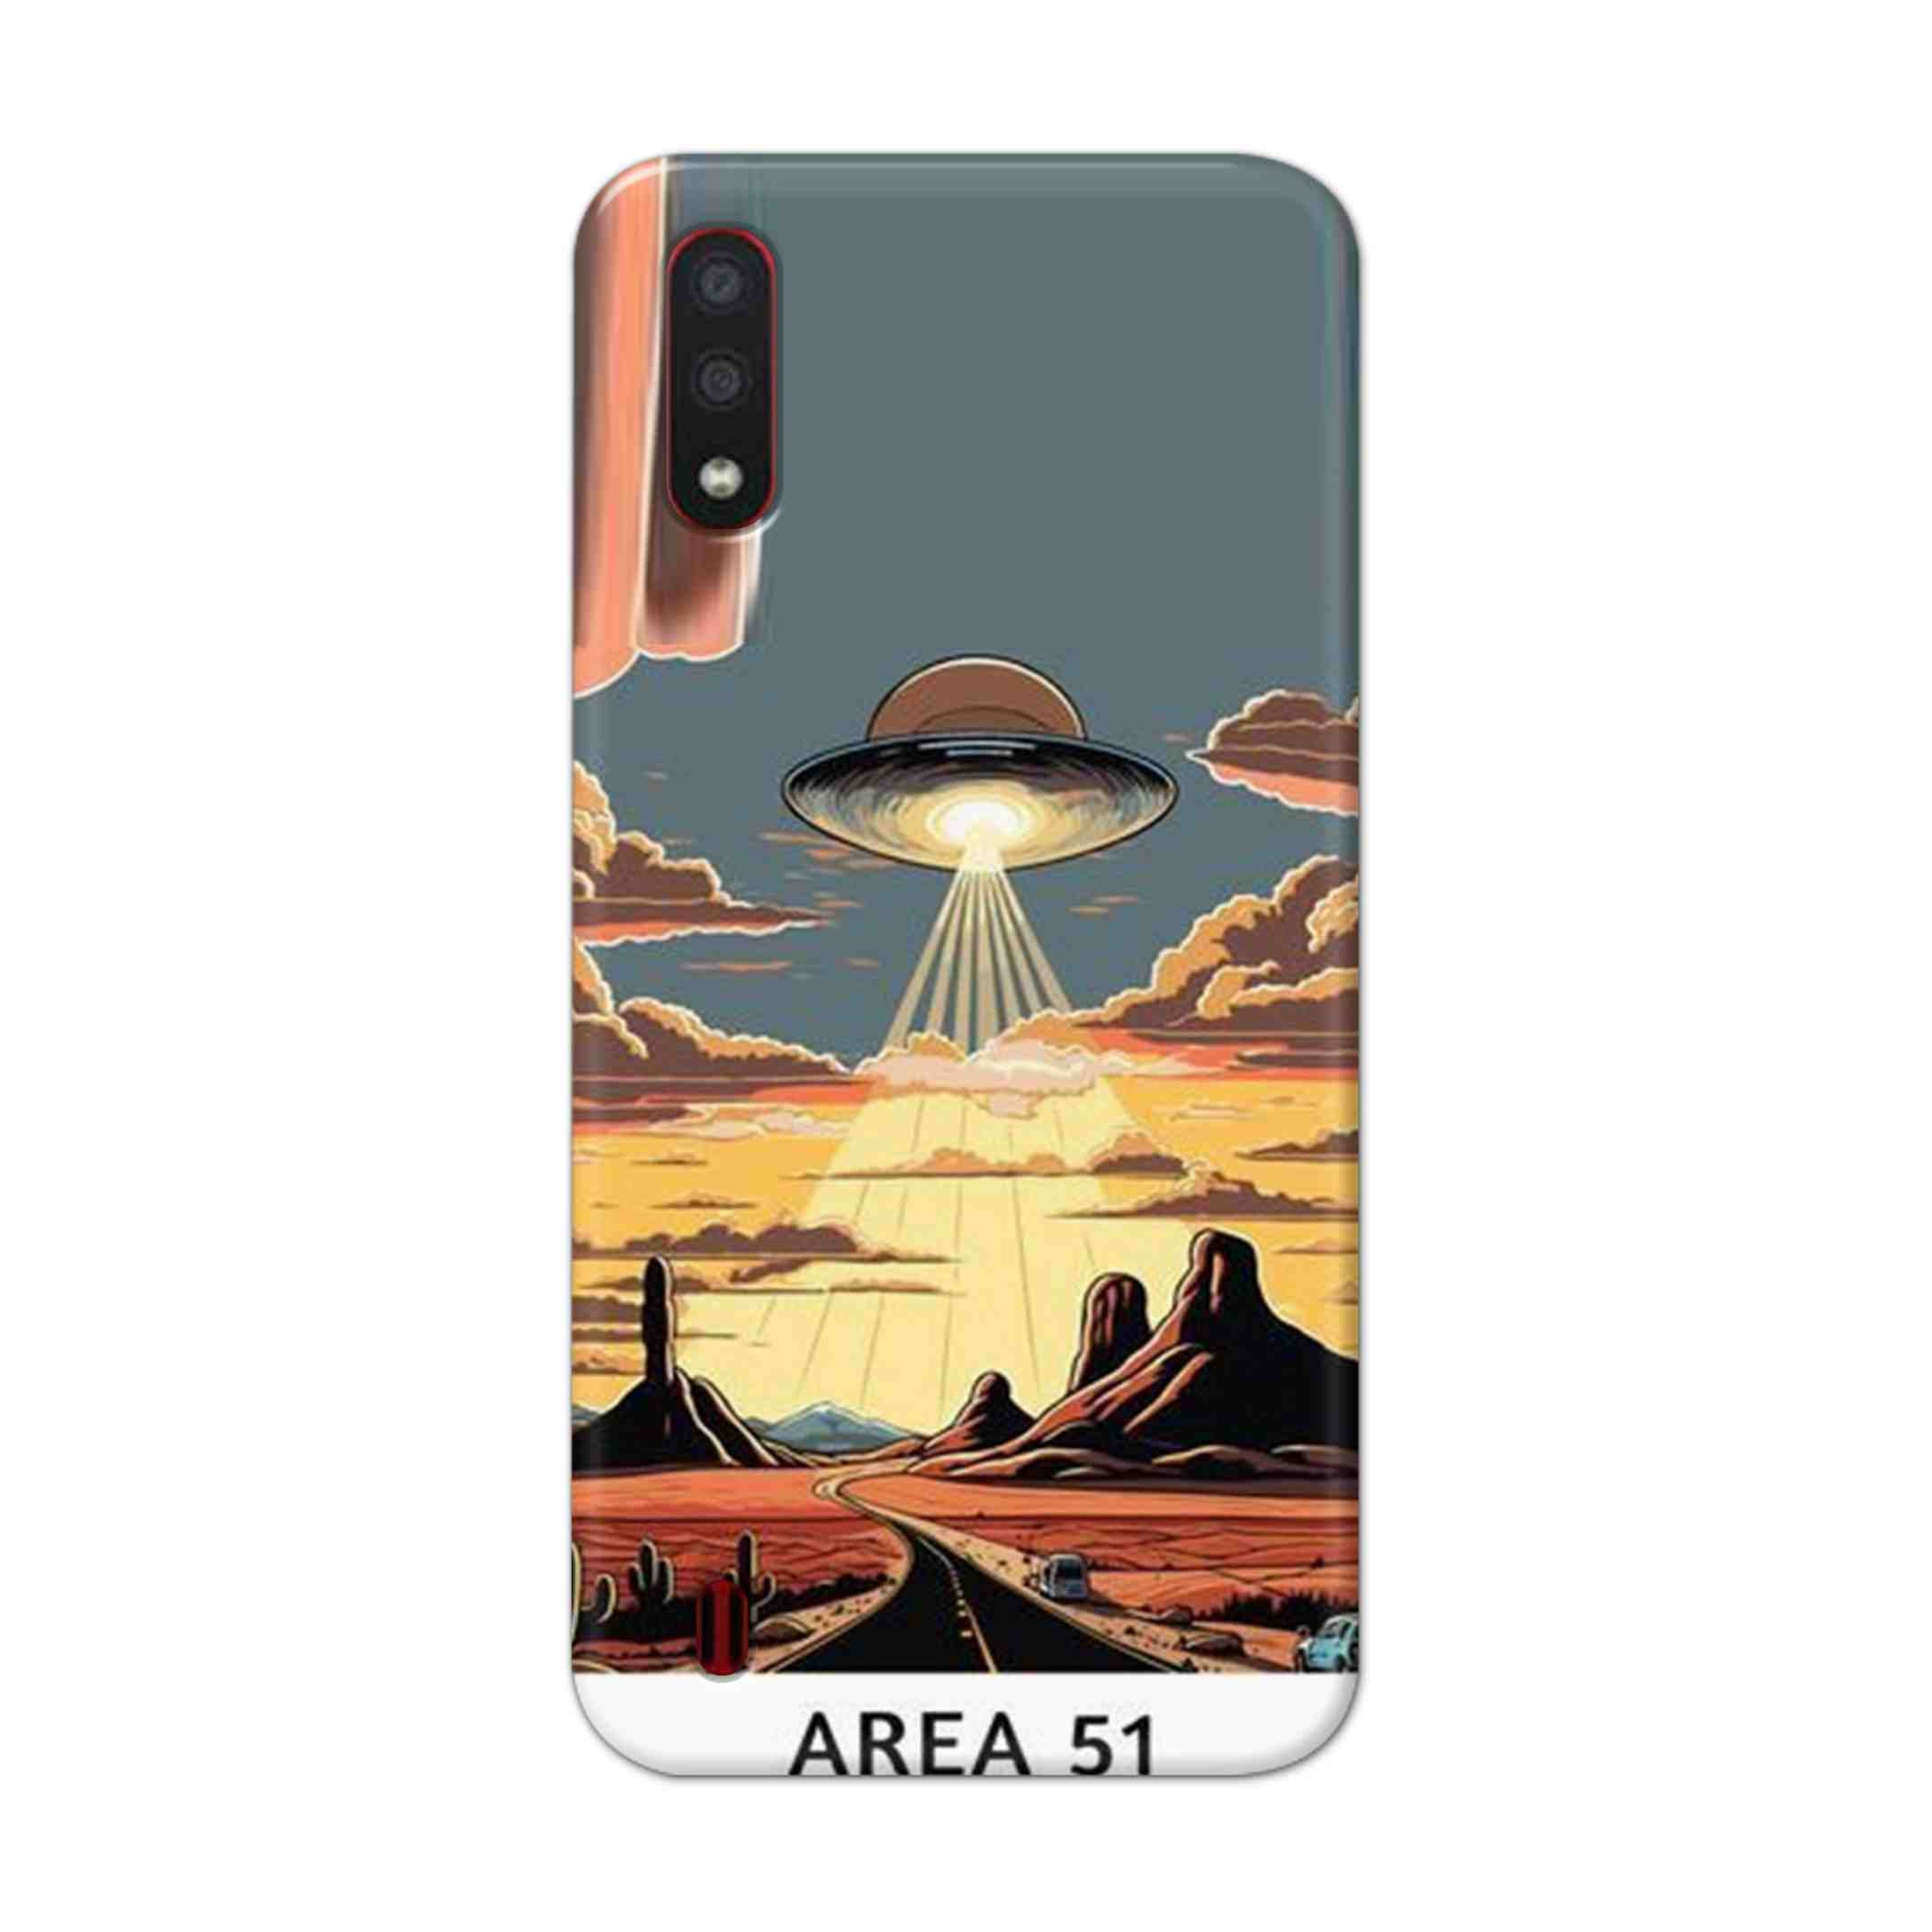 Buy Area 51 Hard Back Mobile Phone Case/Cover For Samsung Galaxy M01 Online